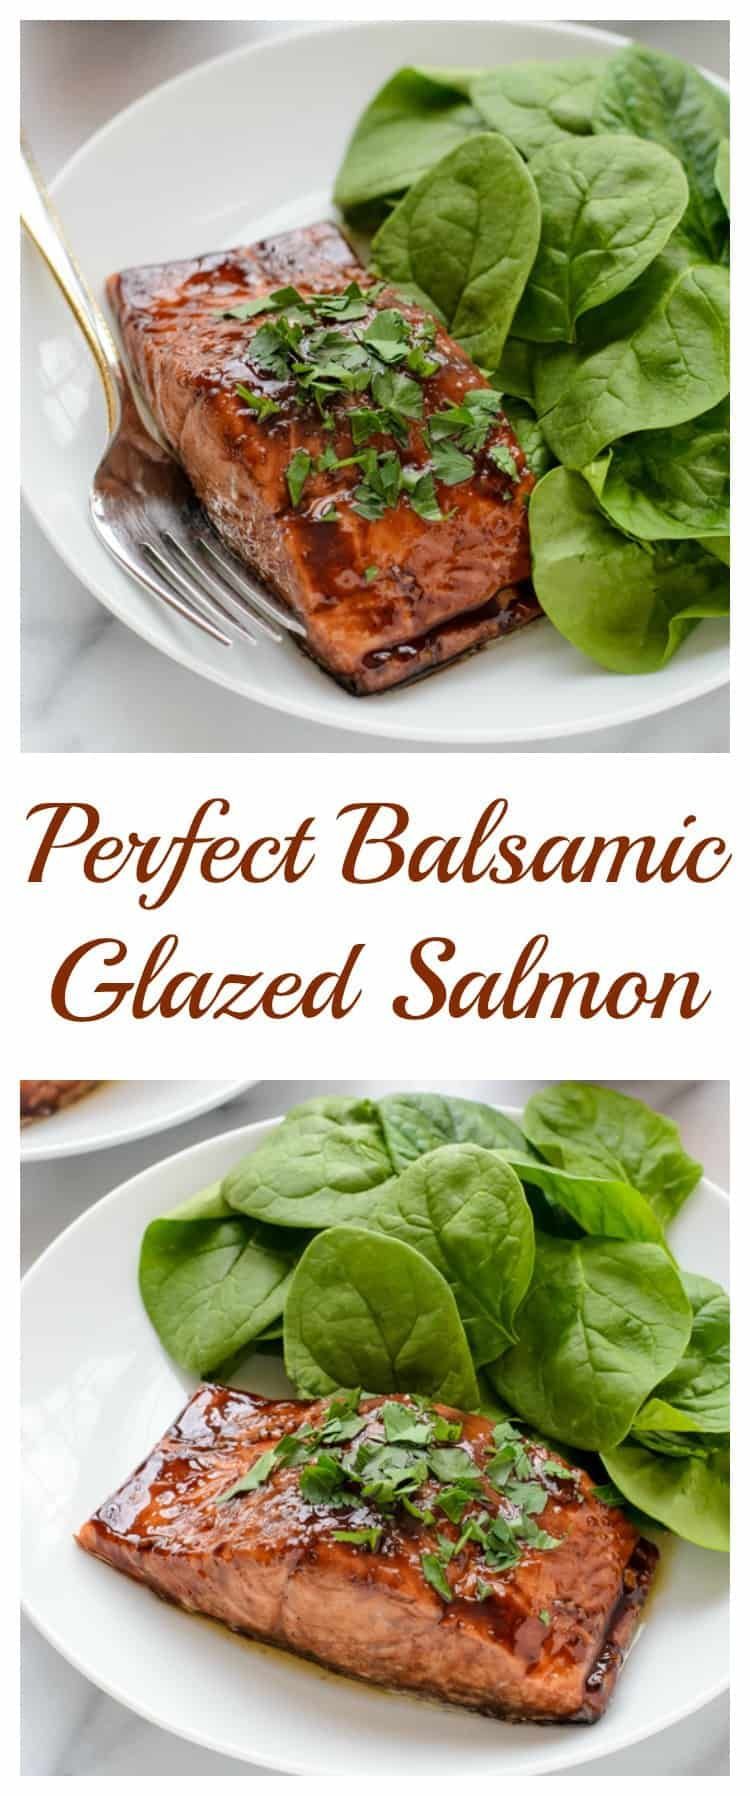 The 9 Best Paleo Salmon Recipes - They Look So Good! -   22 salmon recipes balsamic
 ideas